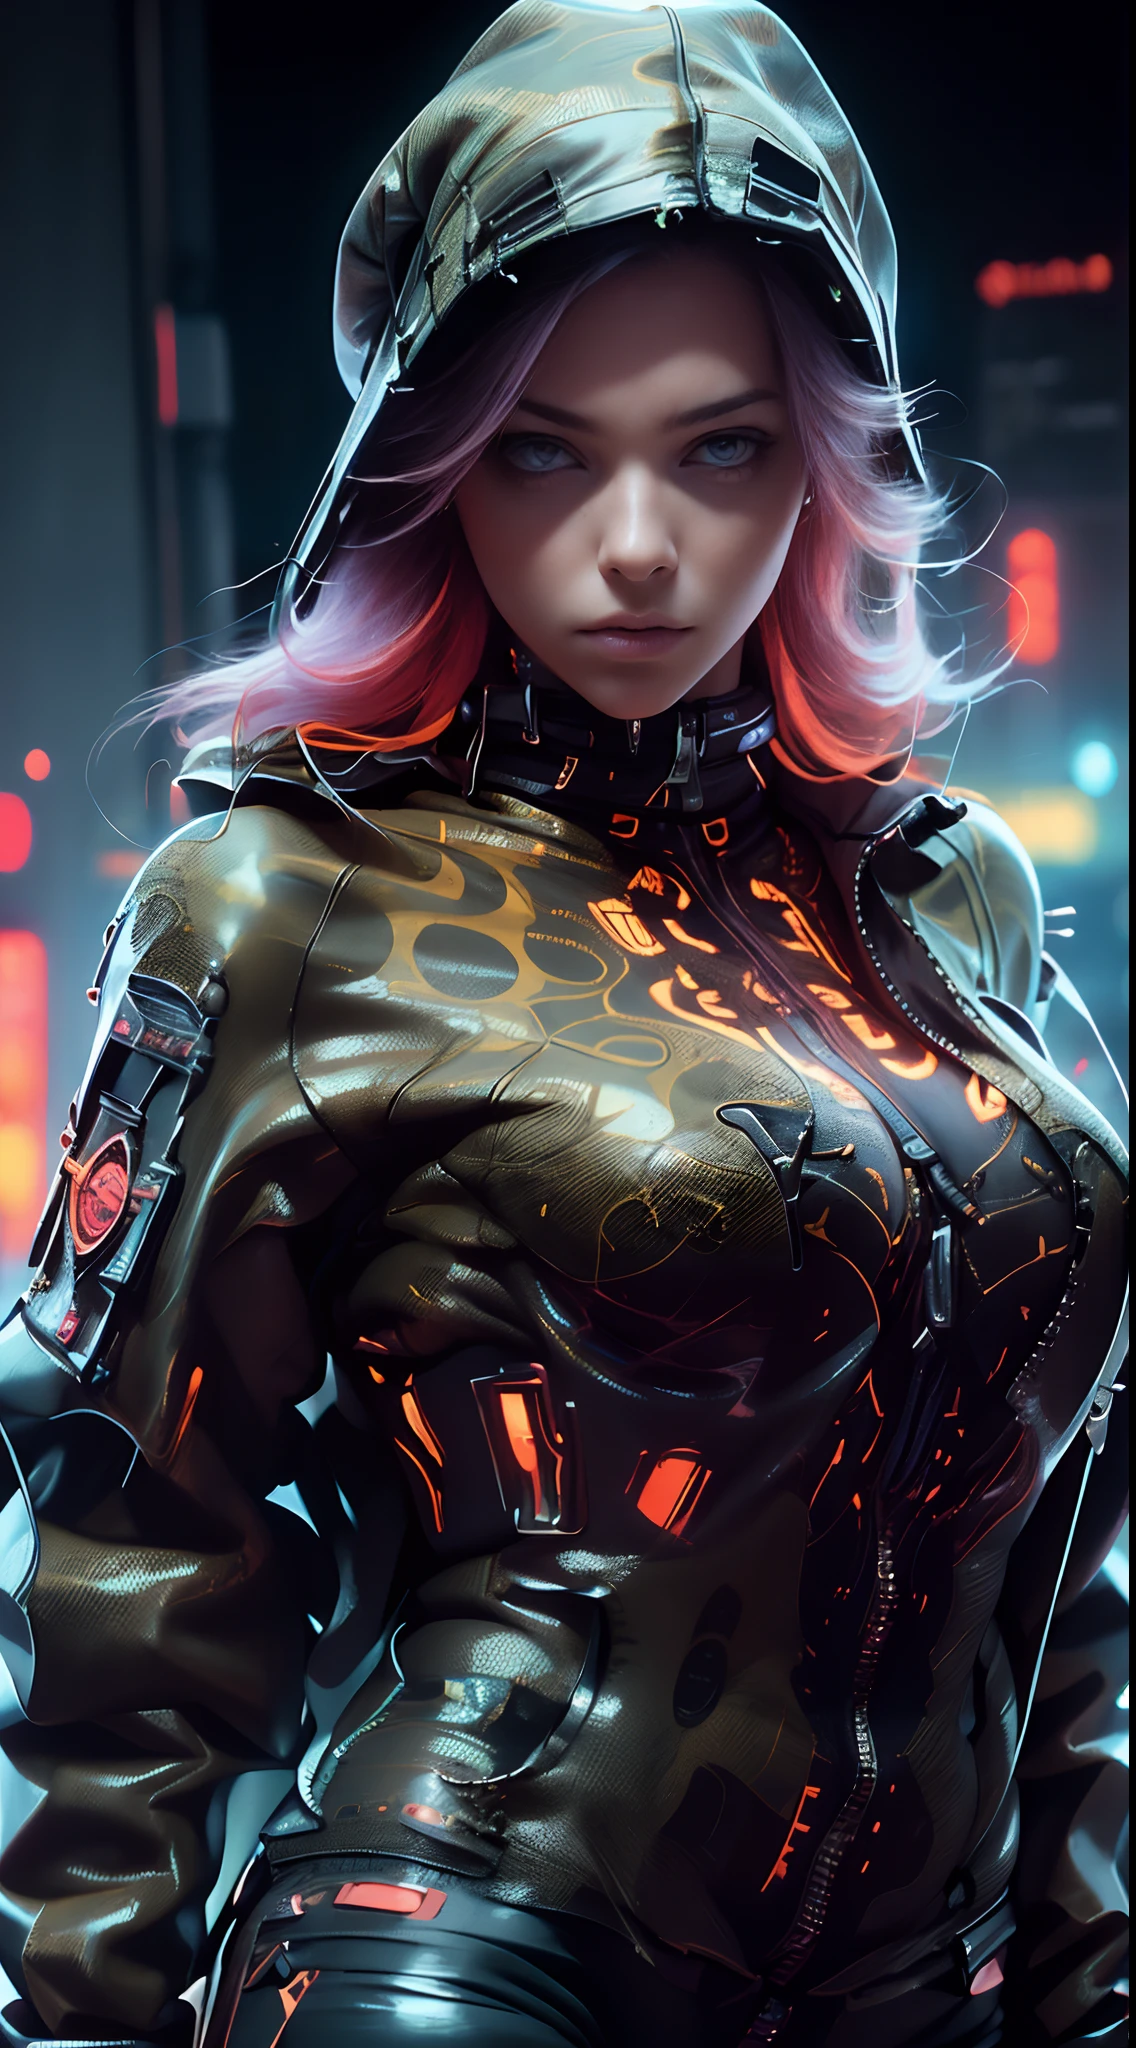 unreal engine:1.4,UHD,The best quality:1.4, photorealistic:1.4, skin texture:1.4, Masterpiece:1.8, 18 year old female, Red mesh hair on black hair, long hair, straight hair,  , Comic appearance，(Apocalyptic City of Fire),(Cyberpunk:1.4),(The best quality,4k,High resolution), Red highlights in black hair, long hair, straight hair, Transforming woman,one，cold eyes ,sharp eye，distressed look，bright red eyes，Improved facial expression，，Change the appearance of a transformation，beast，Bestialification，evil fight，Buttle，Delicate illustrations drawn in detail，Torn clothes with decoration，disheveled clothes，Realistic depiction，vibrant colors，expressive，Classic background